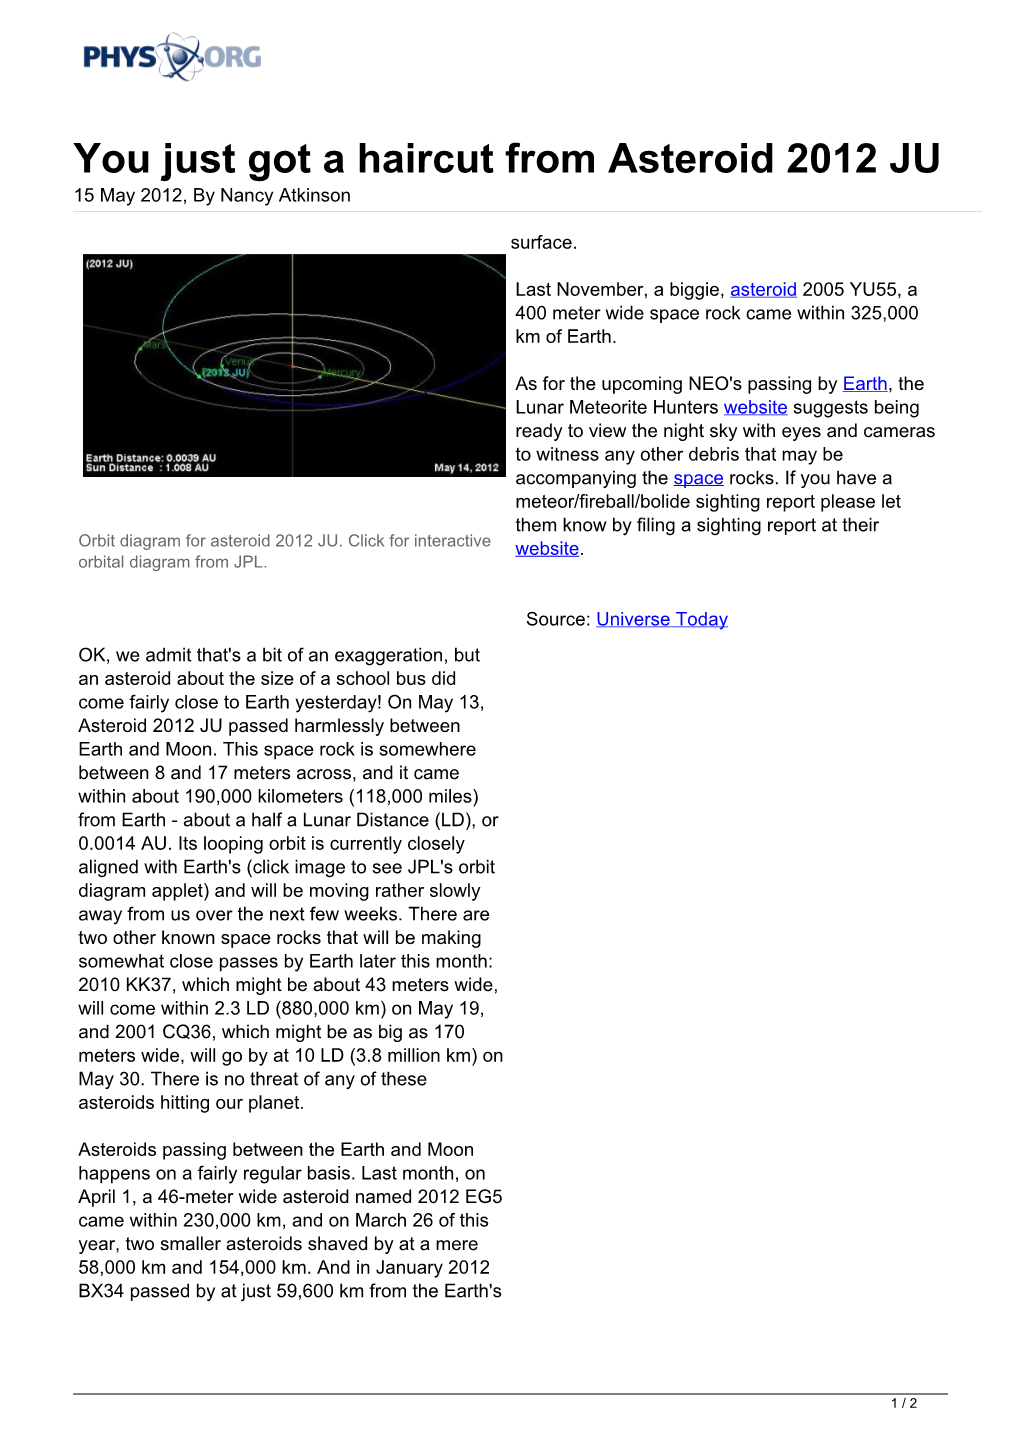 You Just Got a Haircut from Asteroid 2012 JU 15 May 2012, by Nancy Atkinson